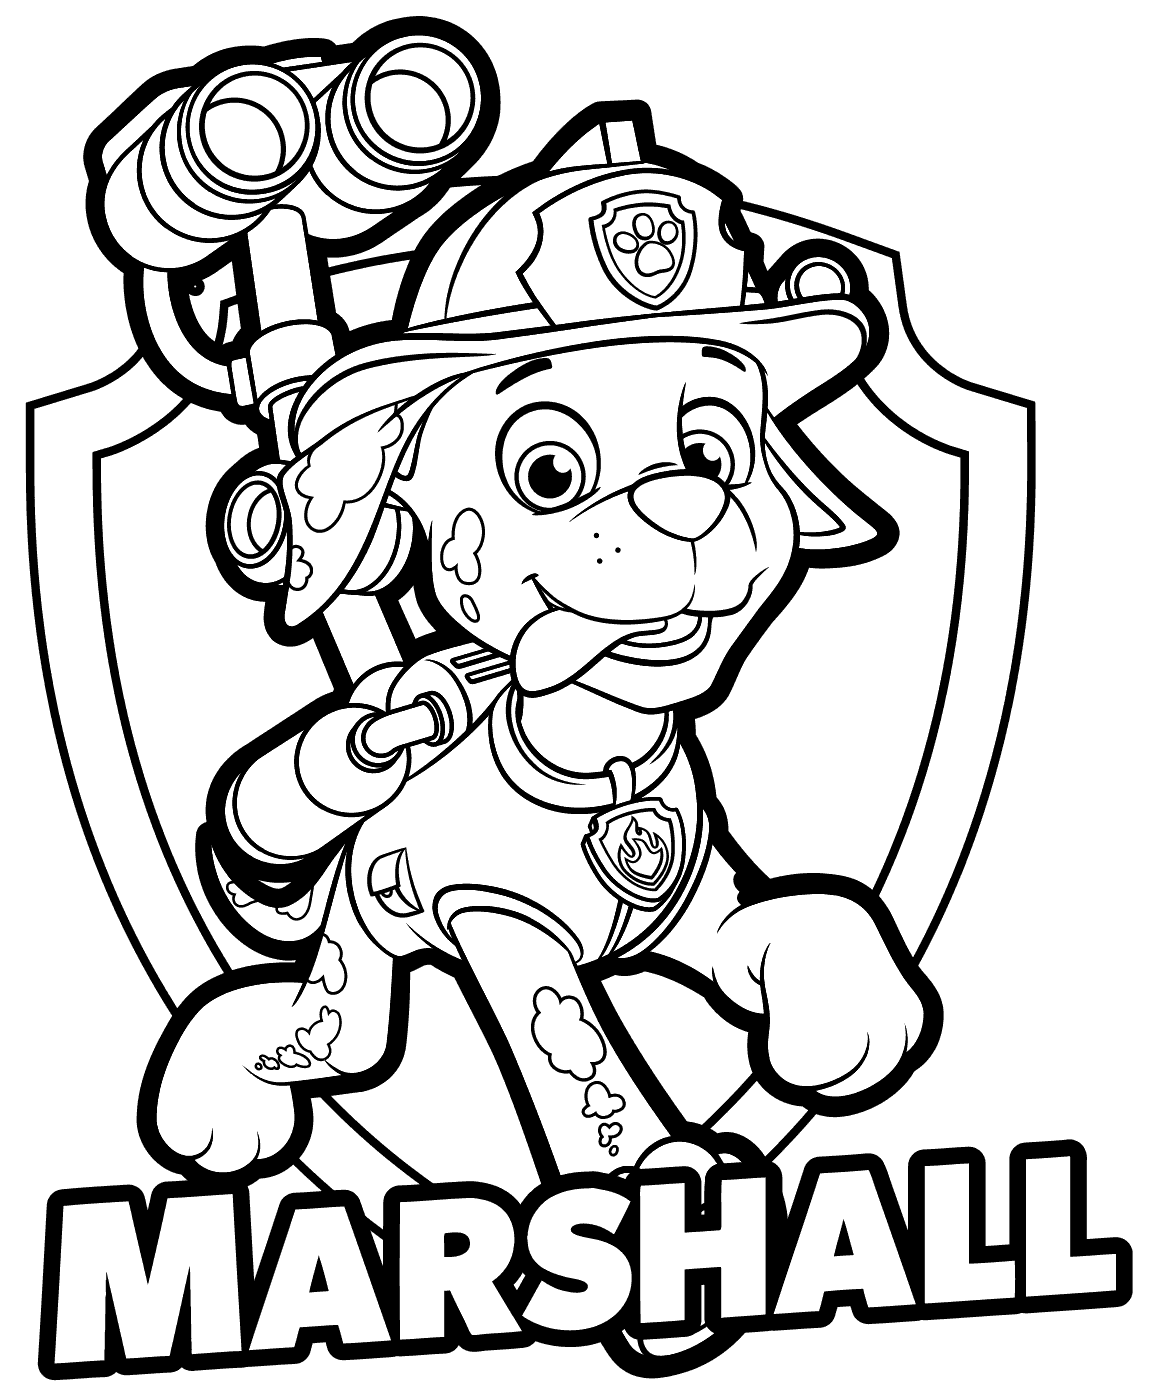 Marshall - Paw Patrol Coloring Pages